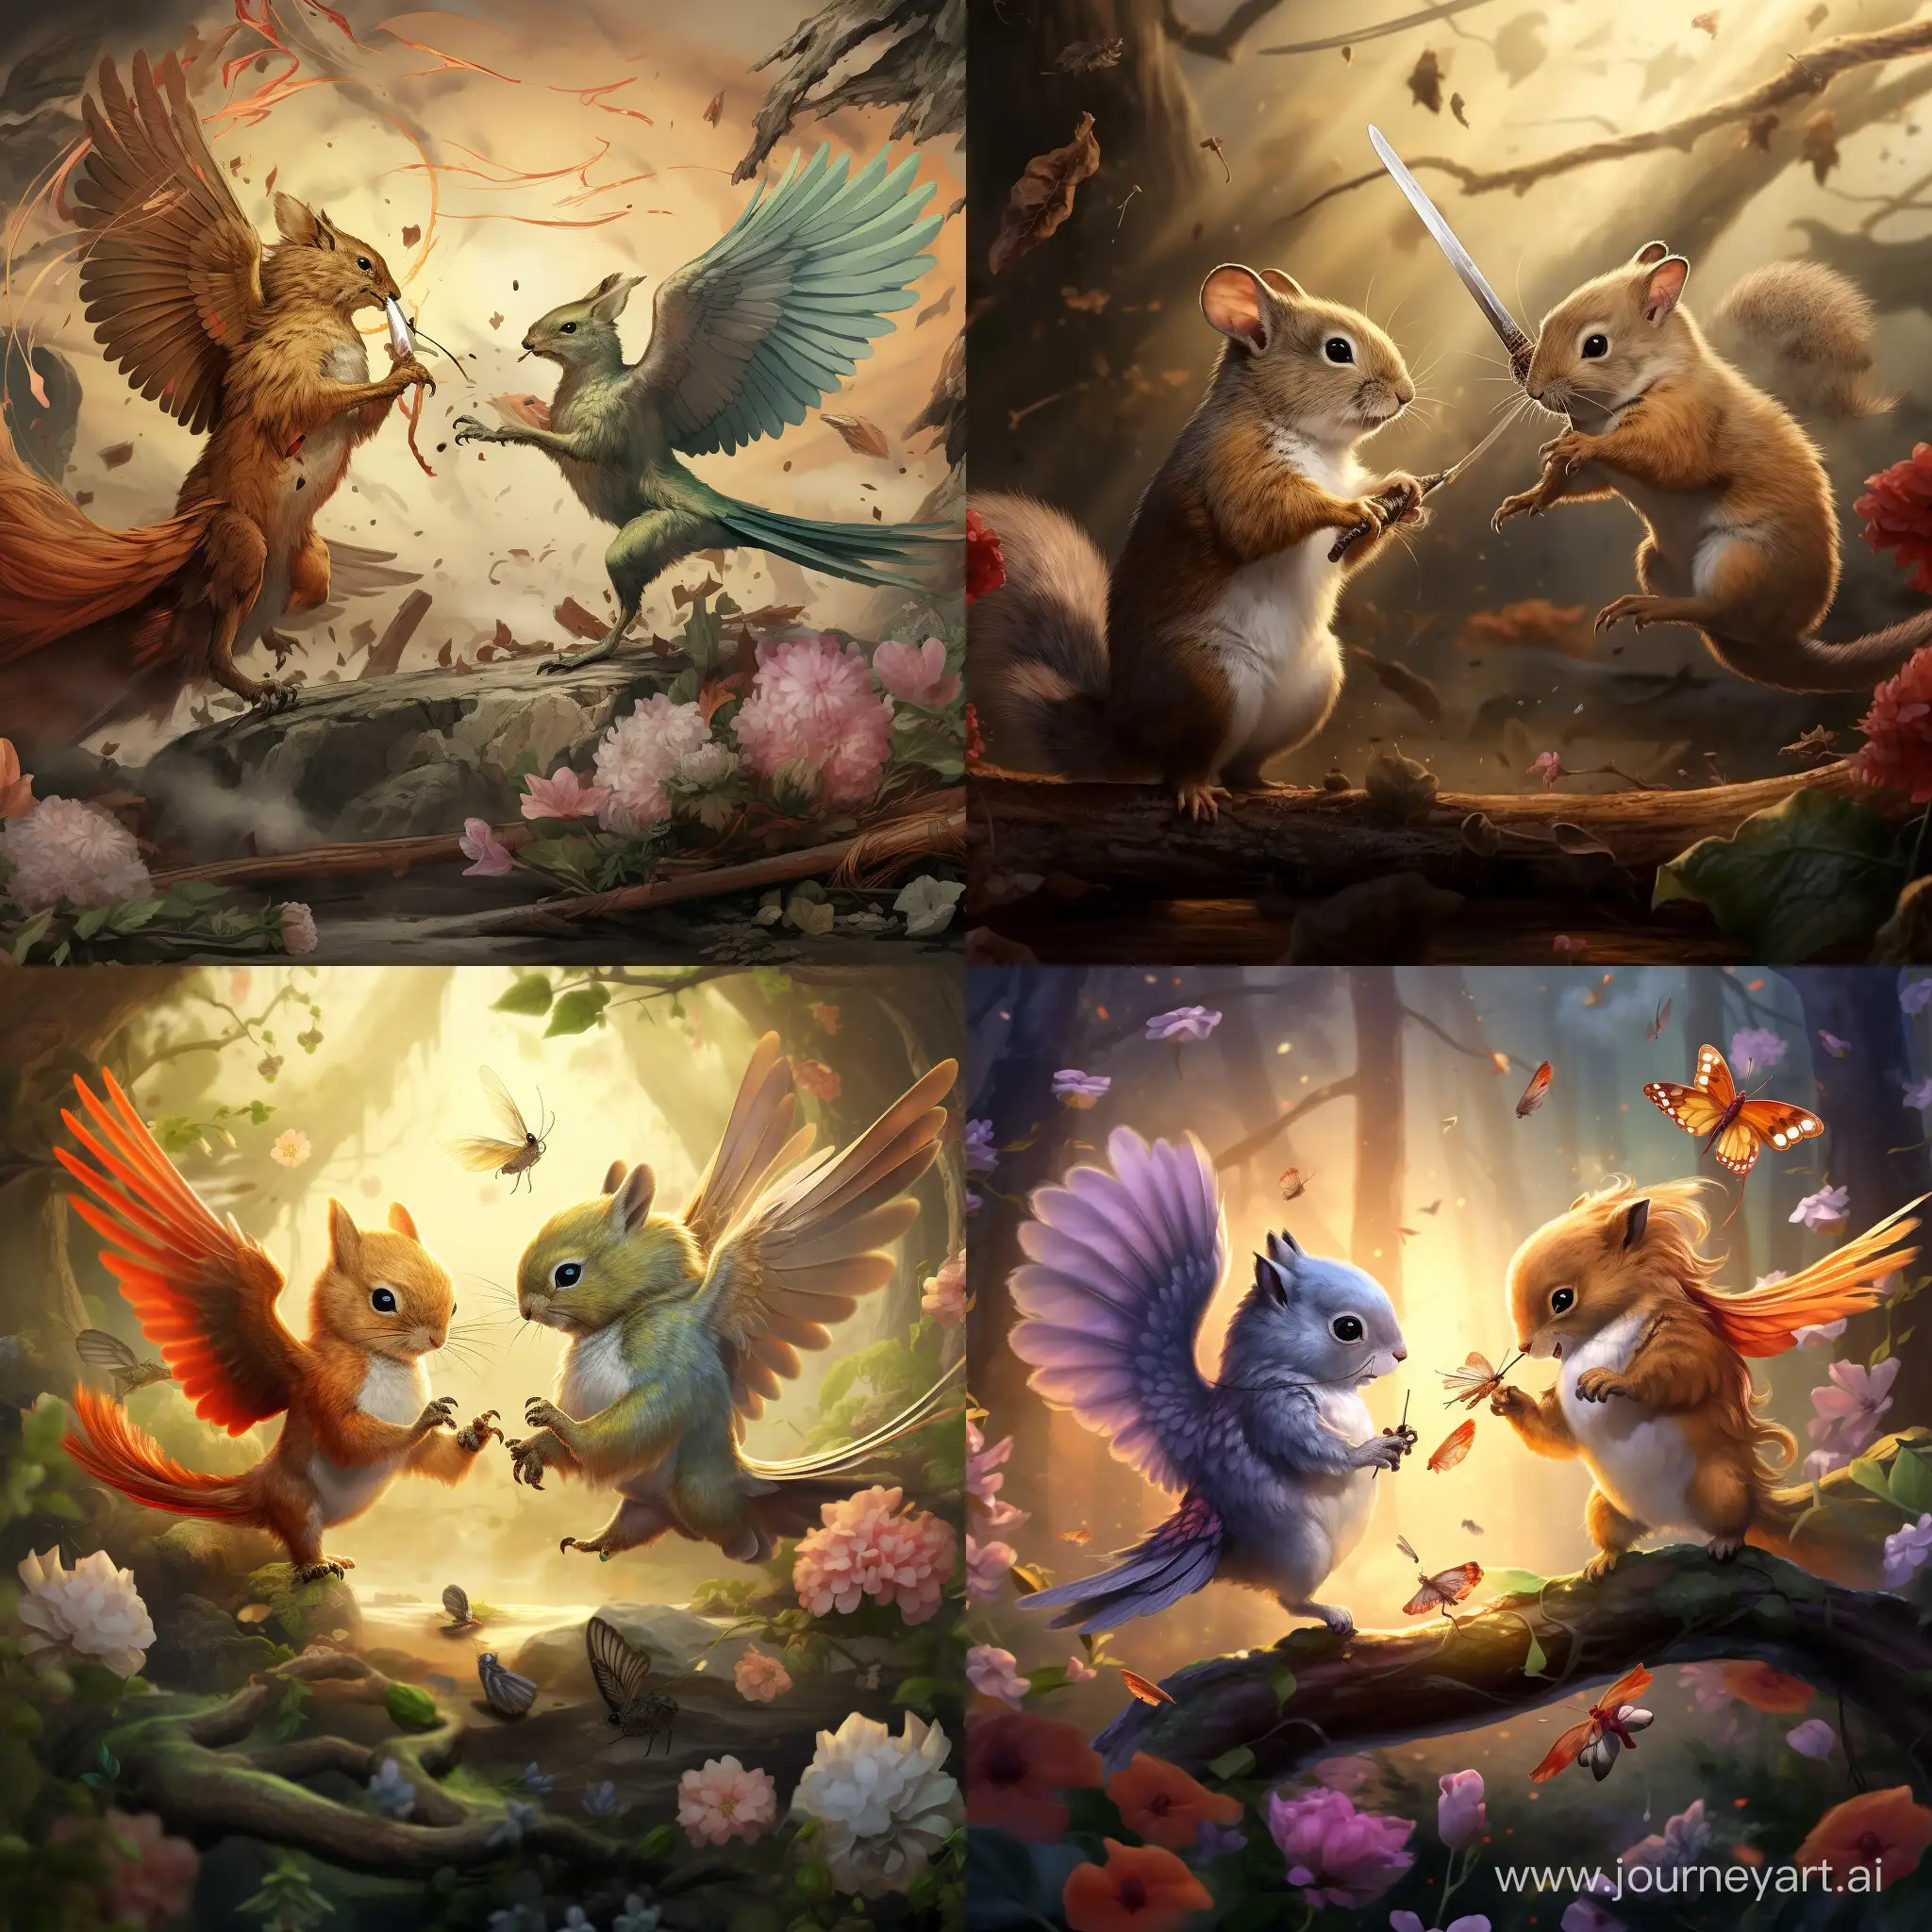 Anime style, Squirrel fights against hummingbird, epic battle, battle to the death